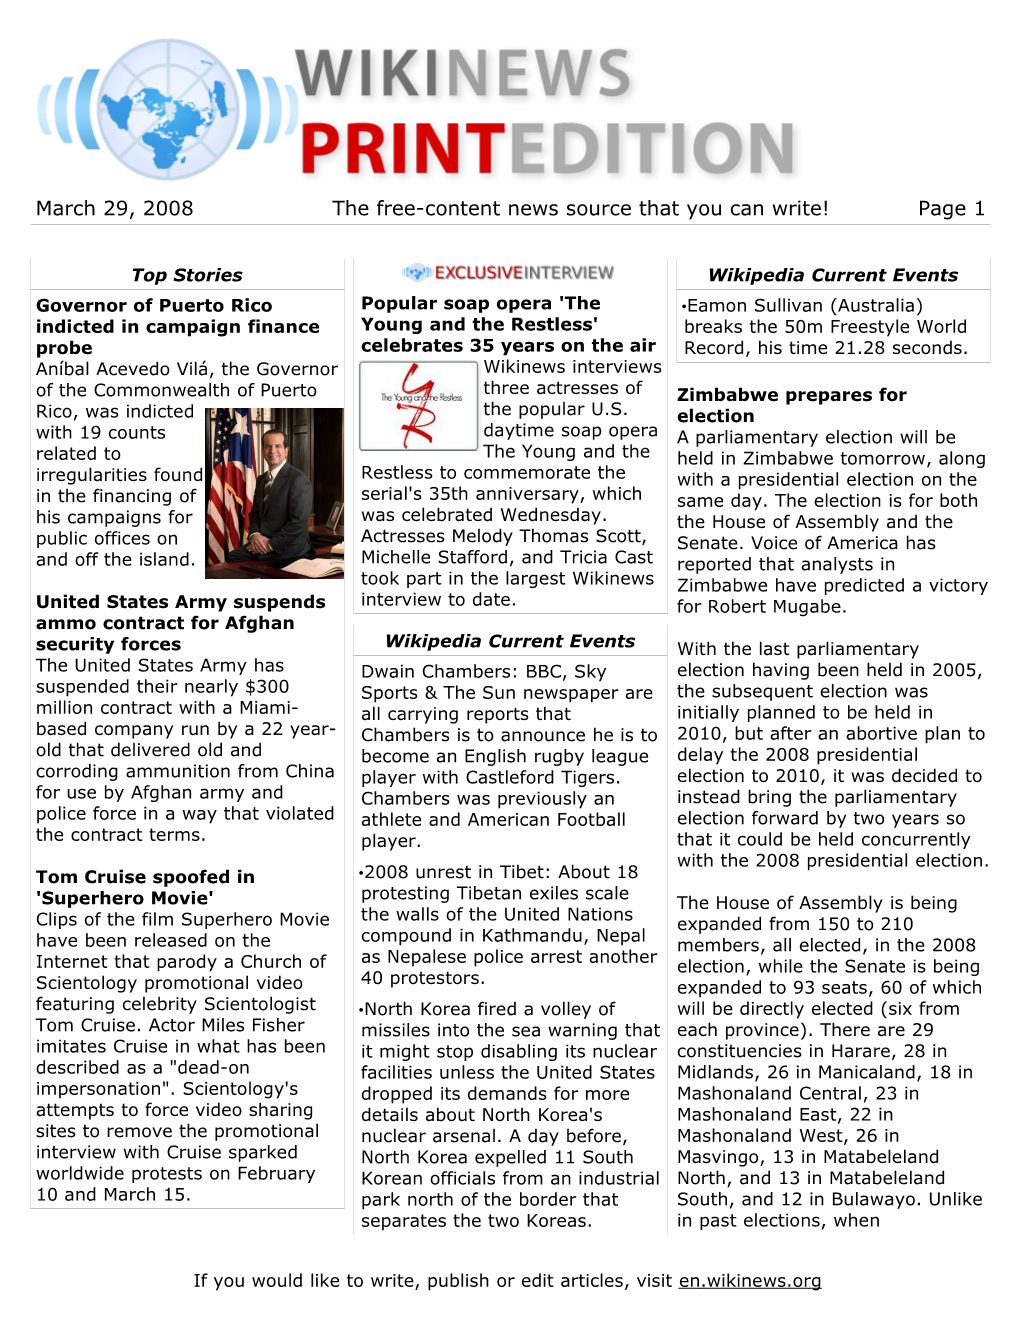 March 29, 2008 the Free-Content News Source That You Can Write! Page 1